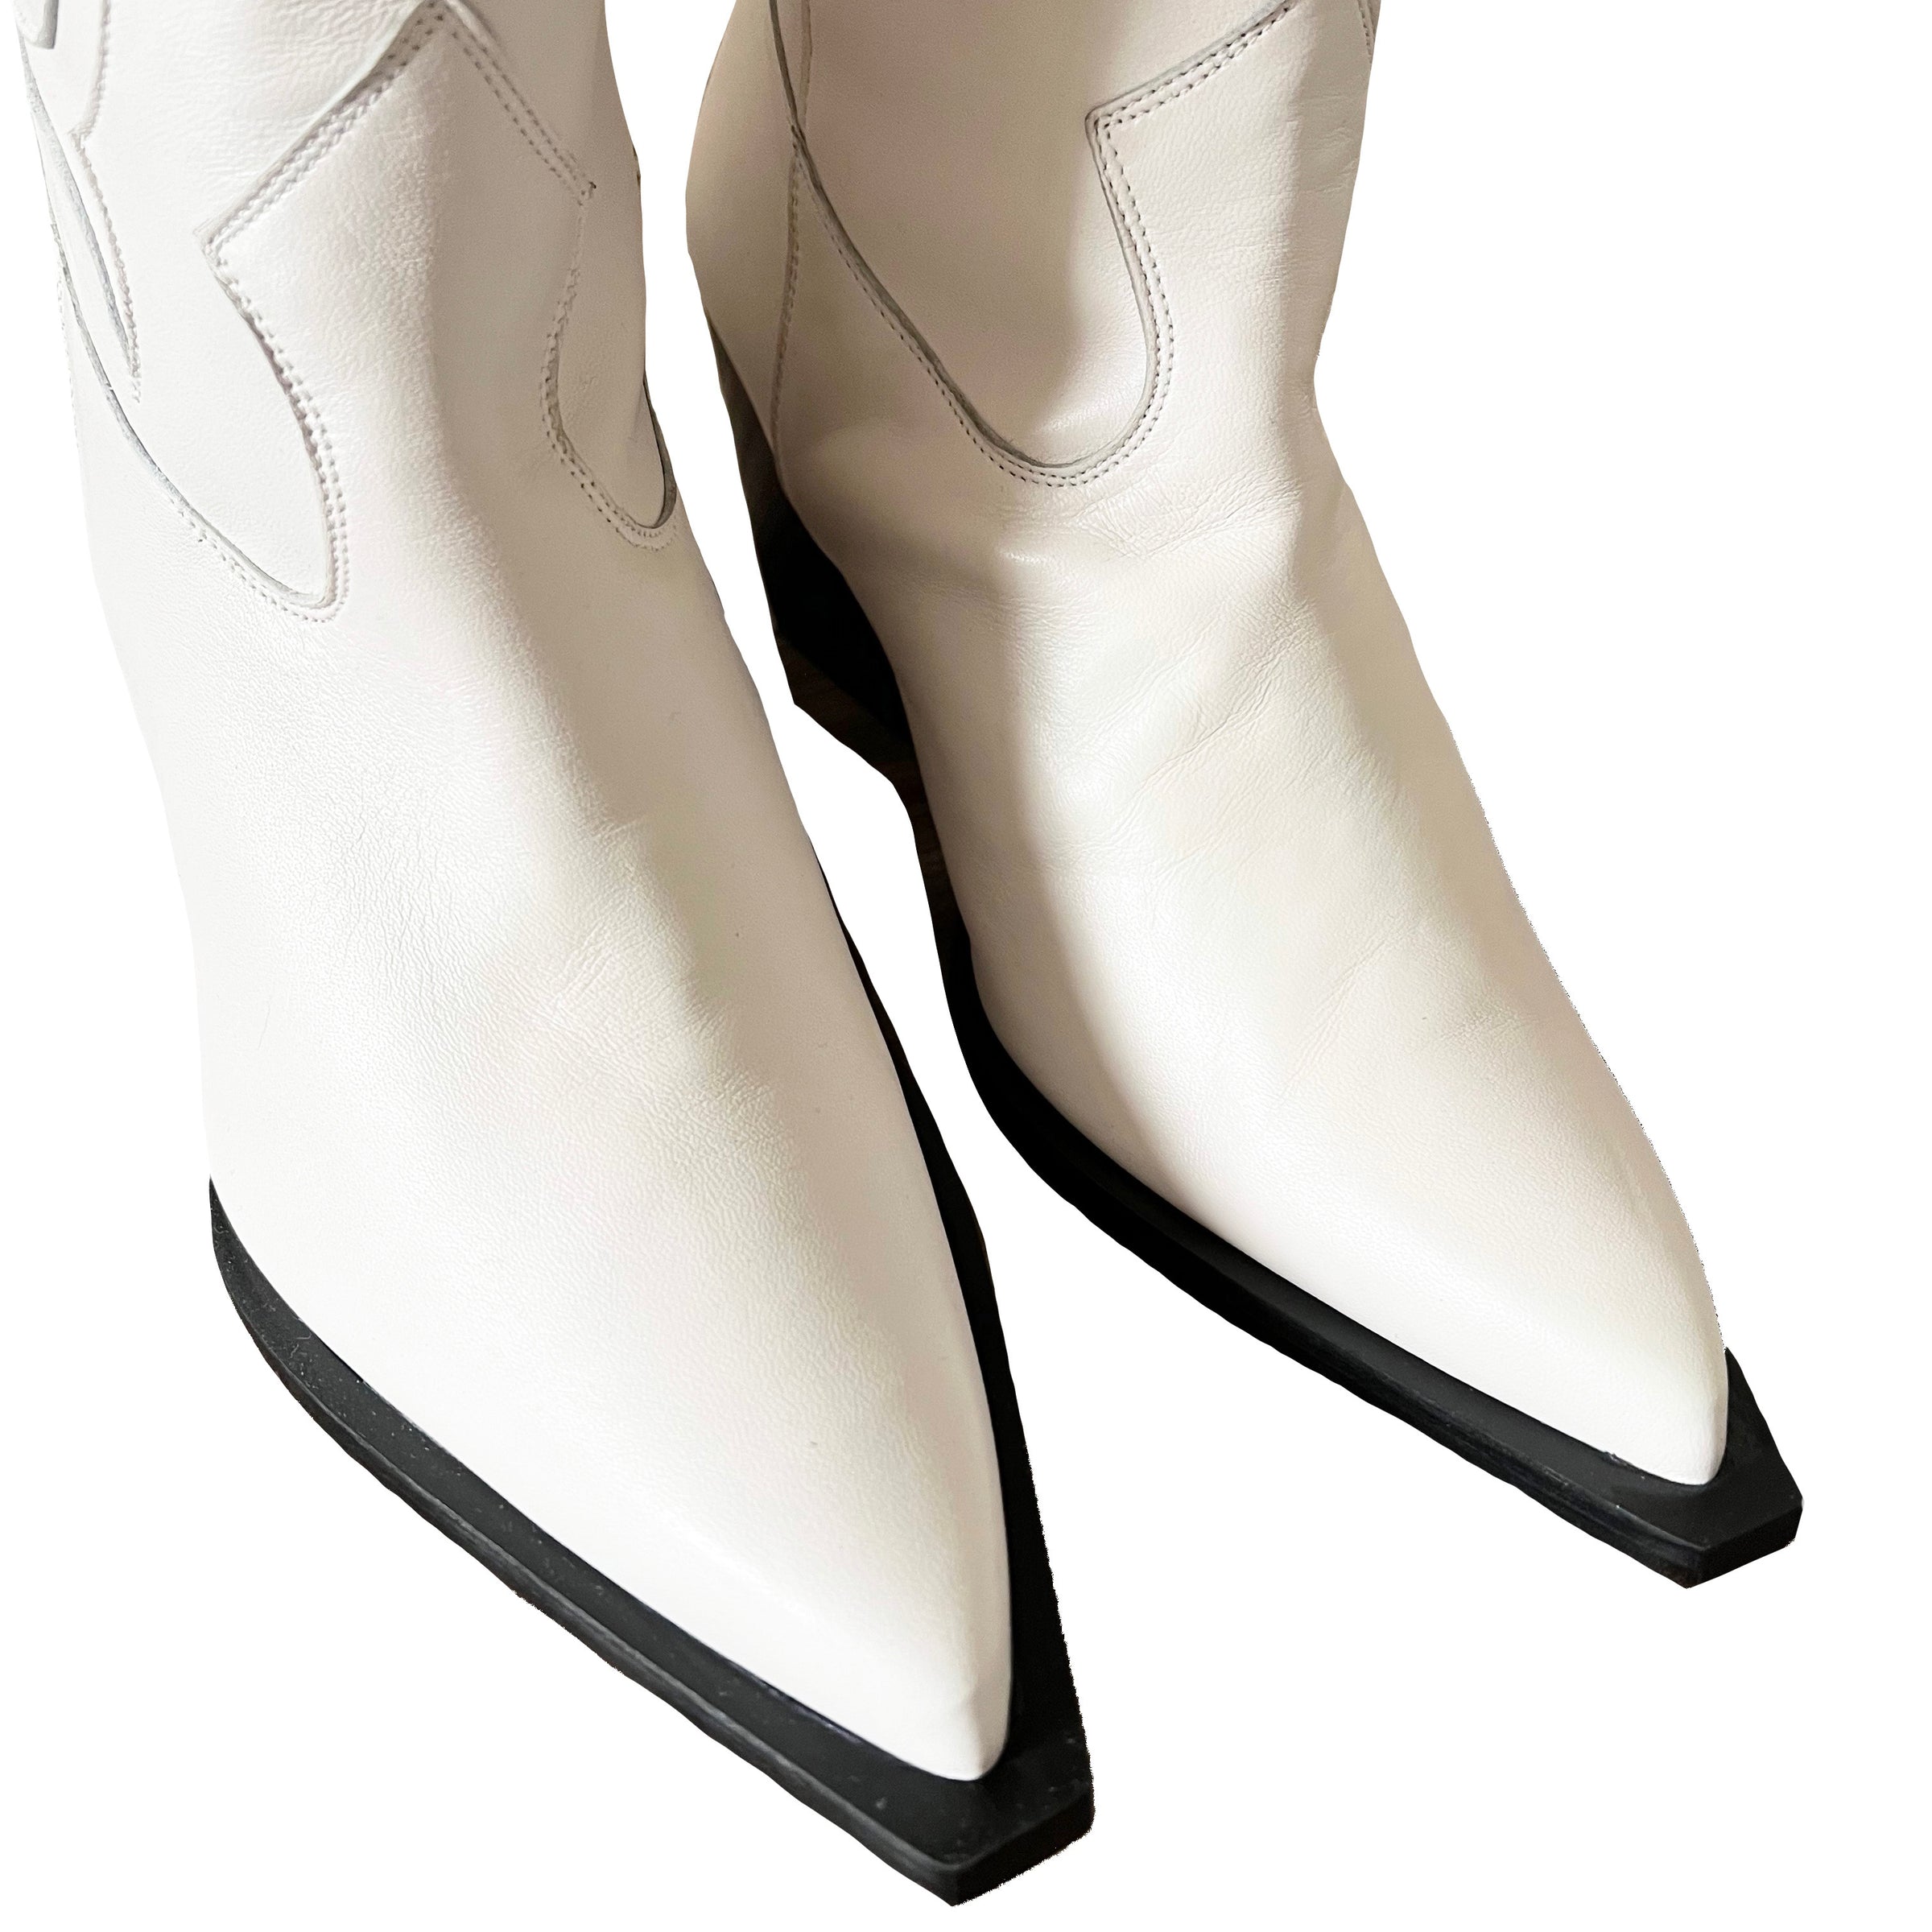 The White Cowboy Boot